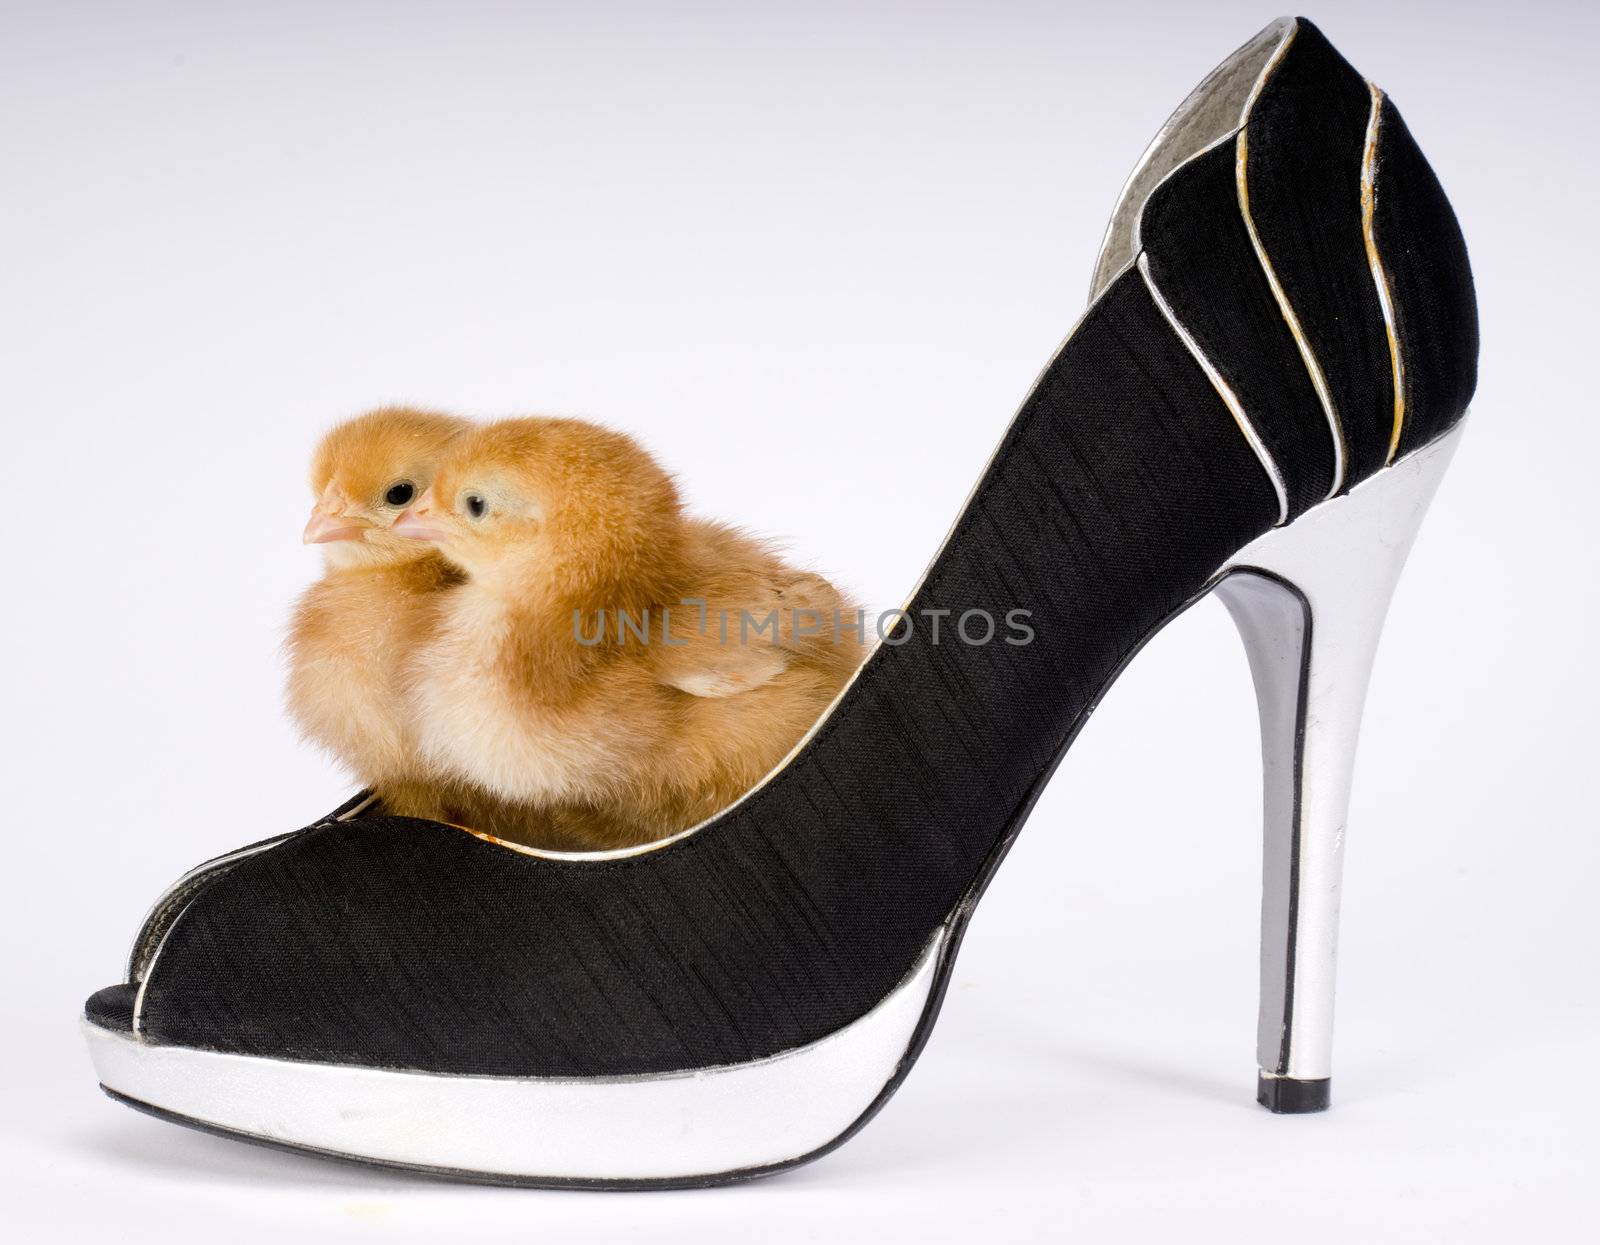 Two Chicks in a Shoe by ChrisBoswell